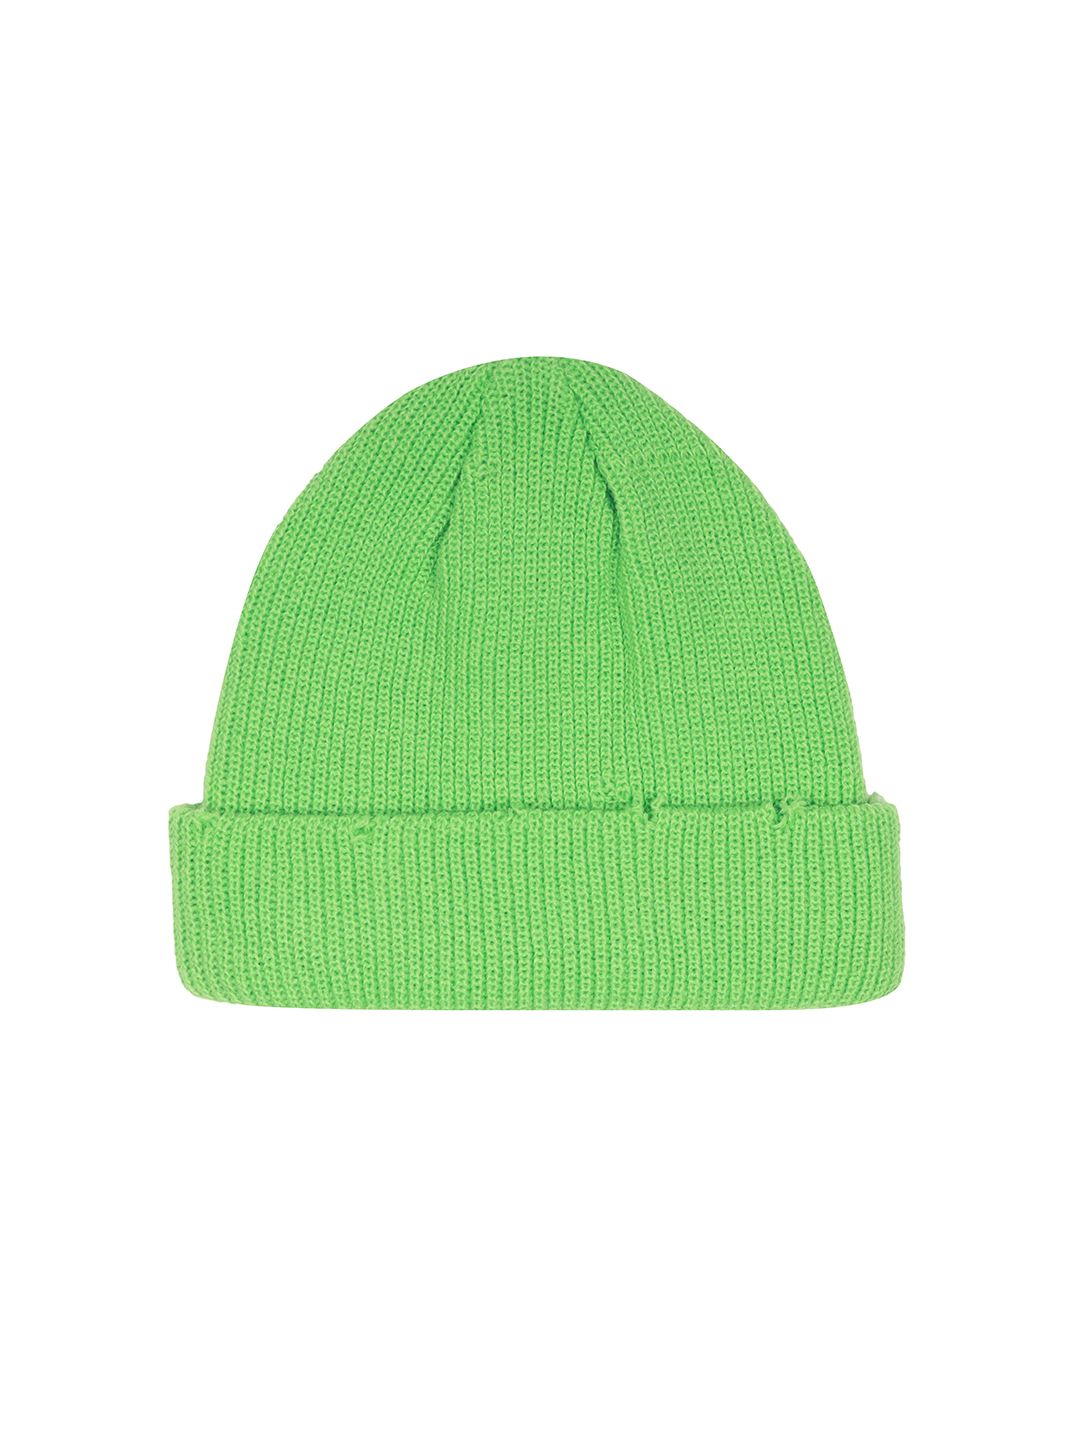 FabSeasons Unisex Green Beanie Price in India